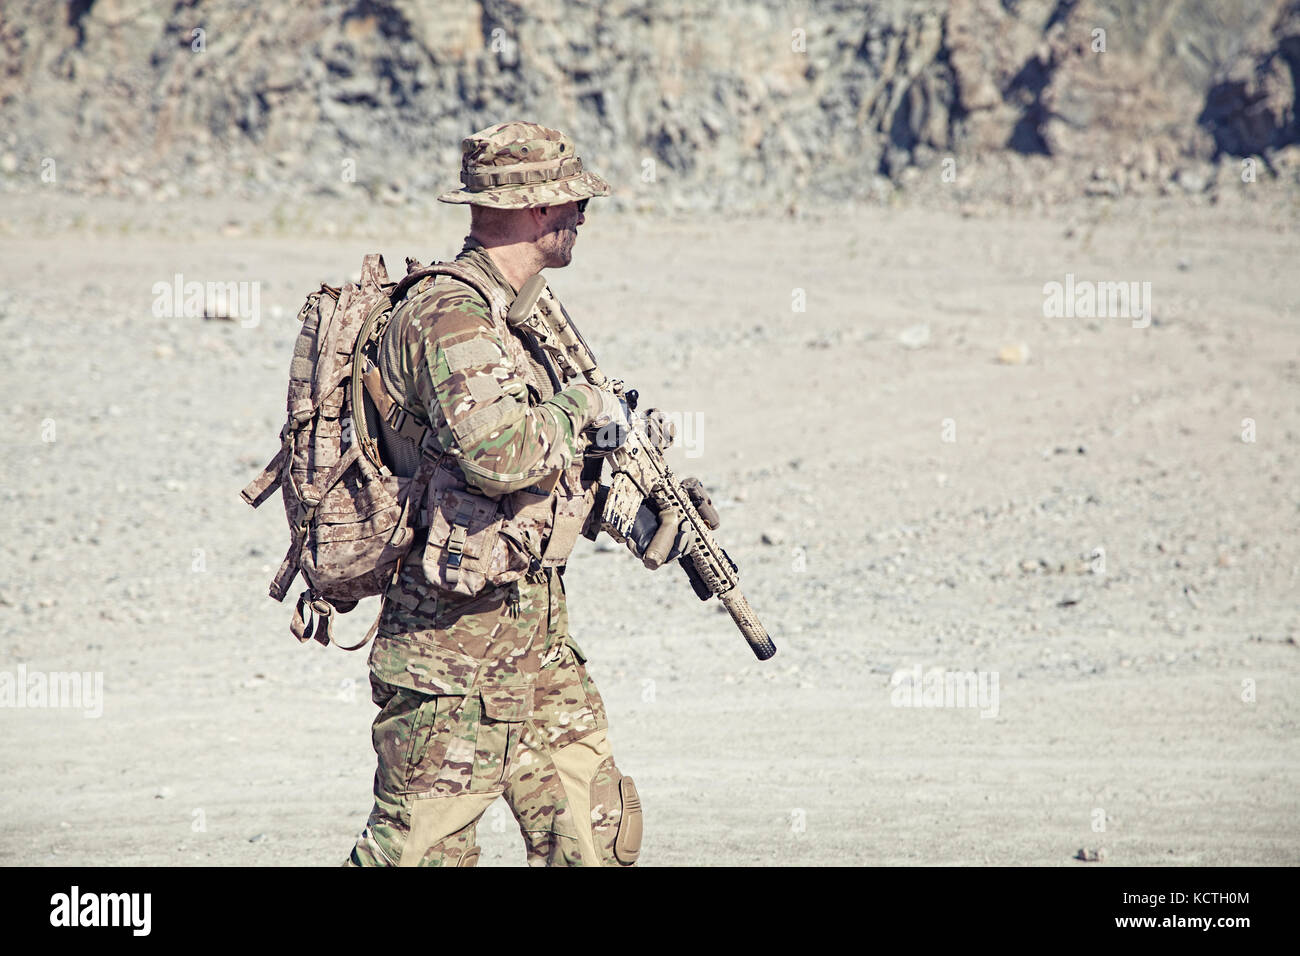 Special forces Operator Stockfoto